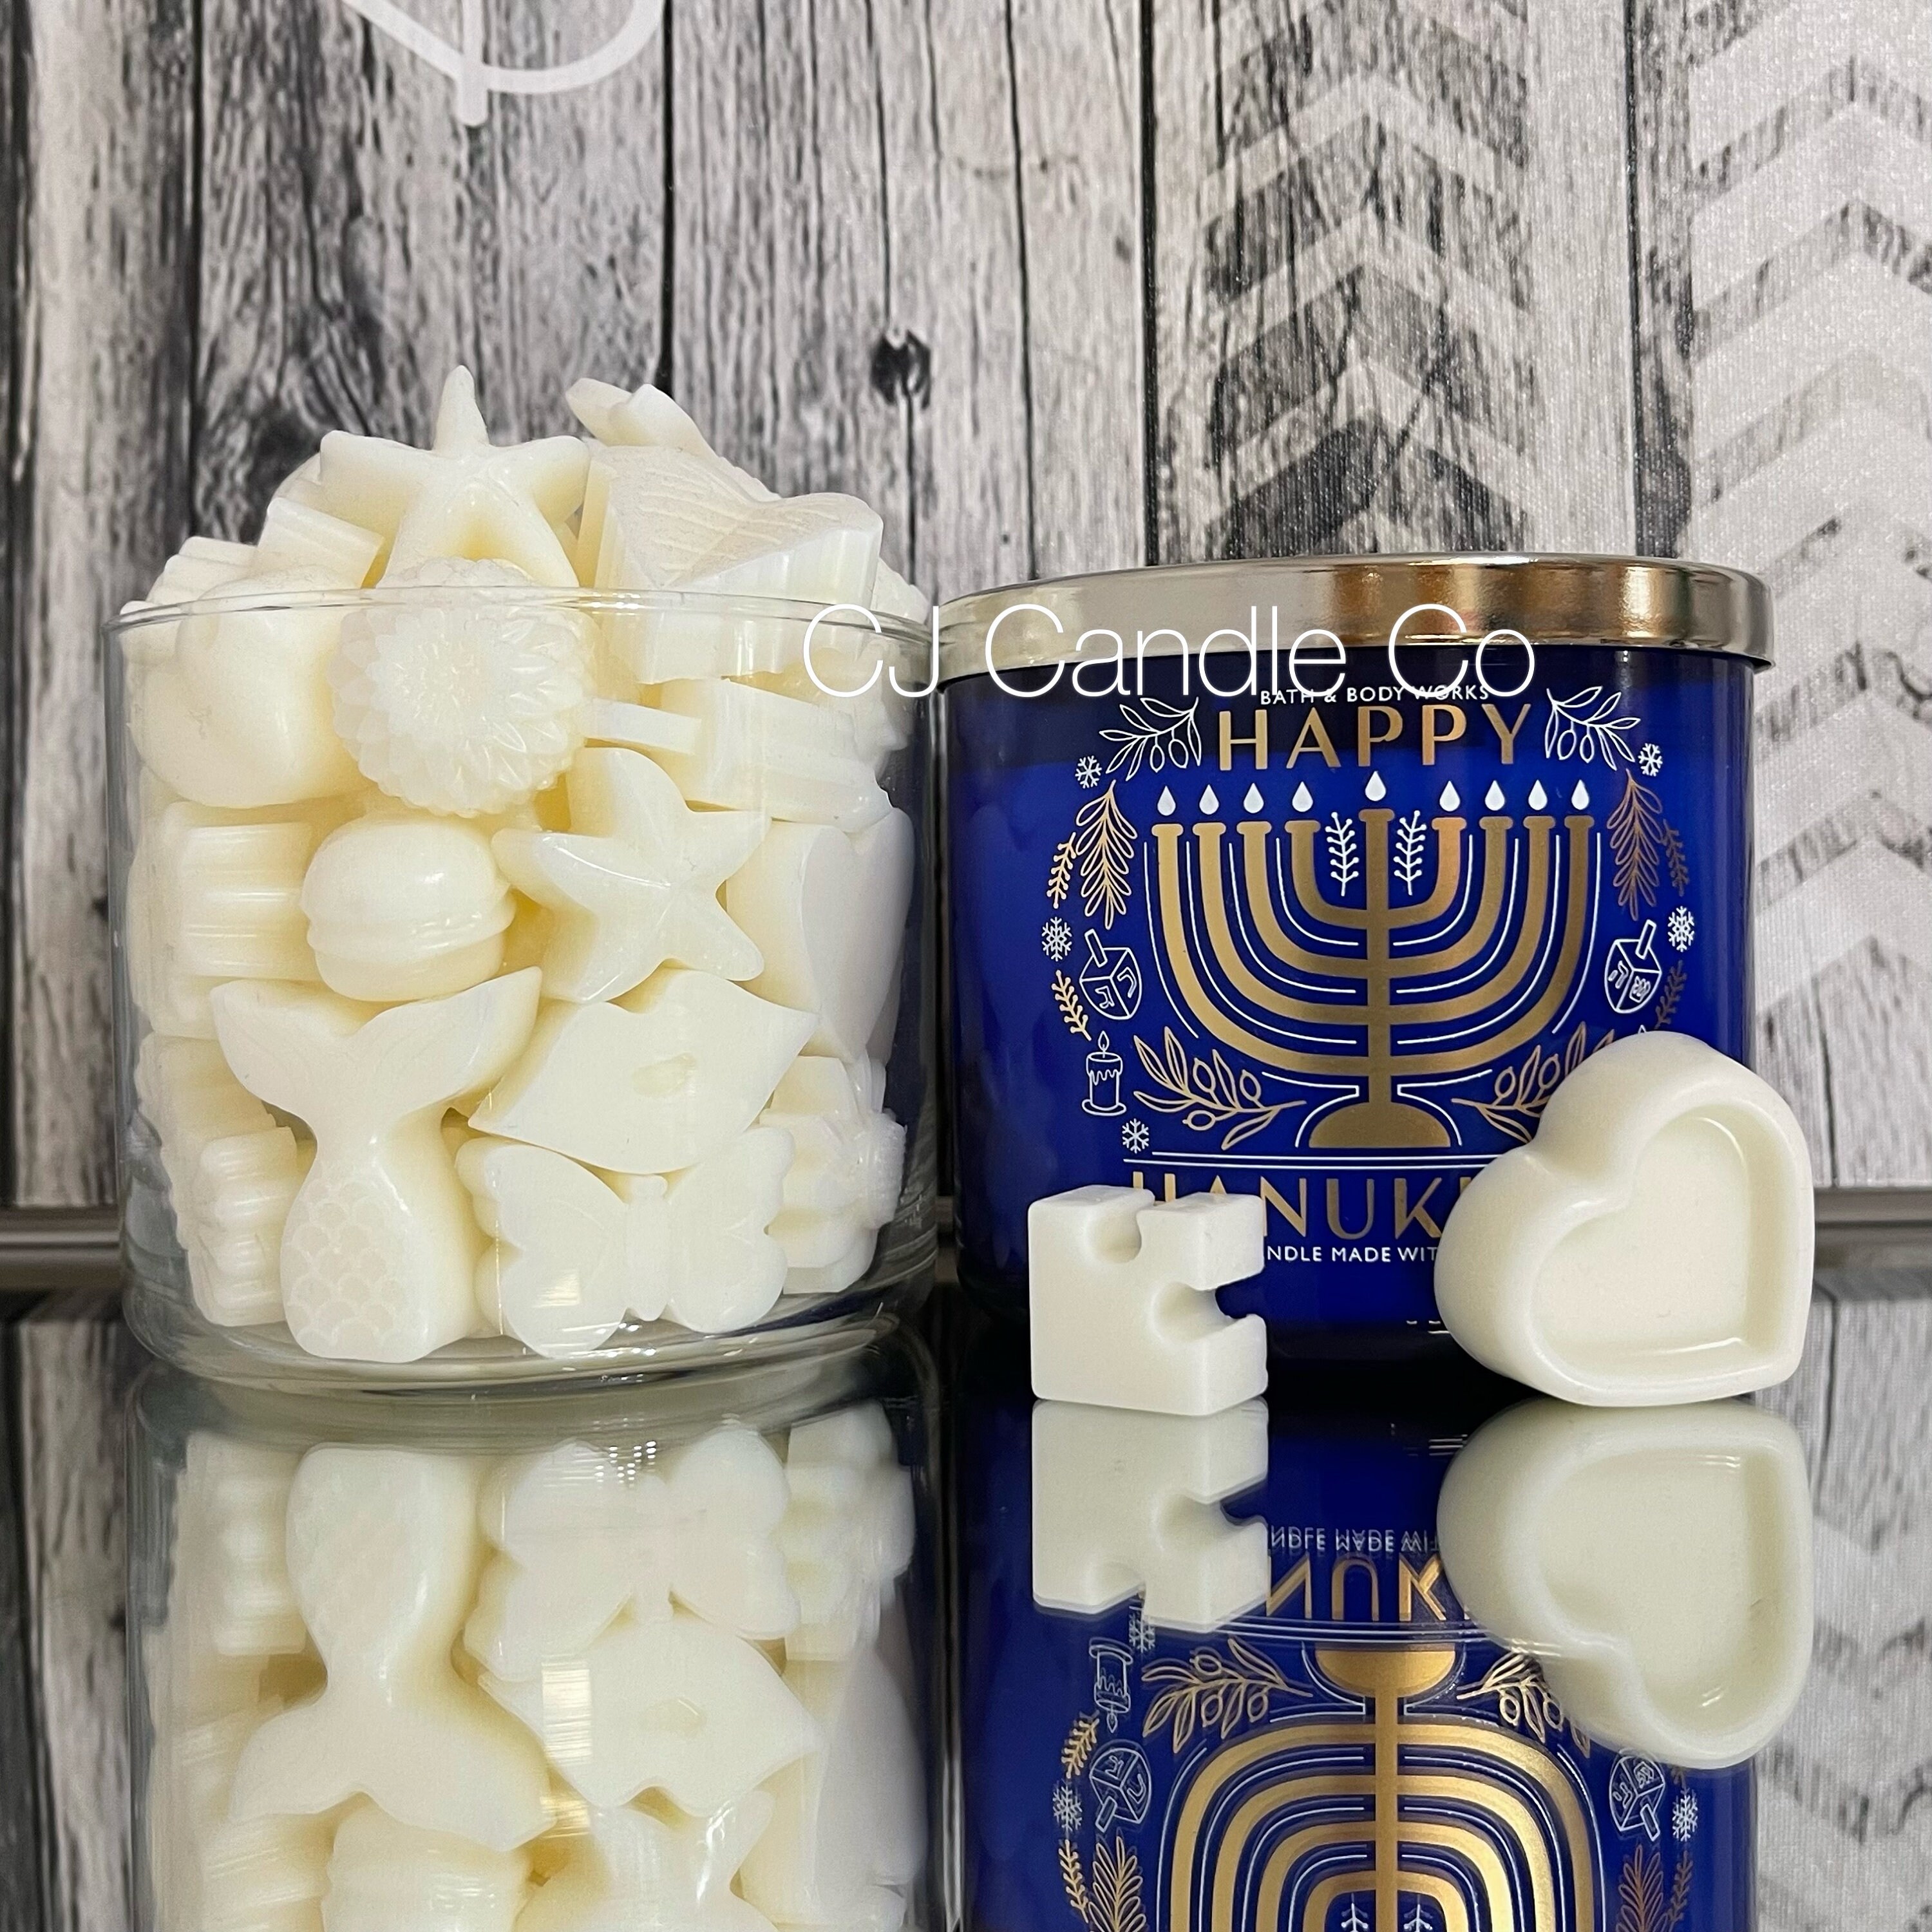 Champagne Toast 3 Bath & Body Works Candle Wax Melts Snap Bars Gift Set BBW  Wax Melts Perfect Gift for Mom, Sister, Valentines Day 